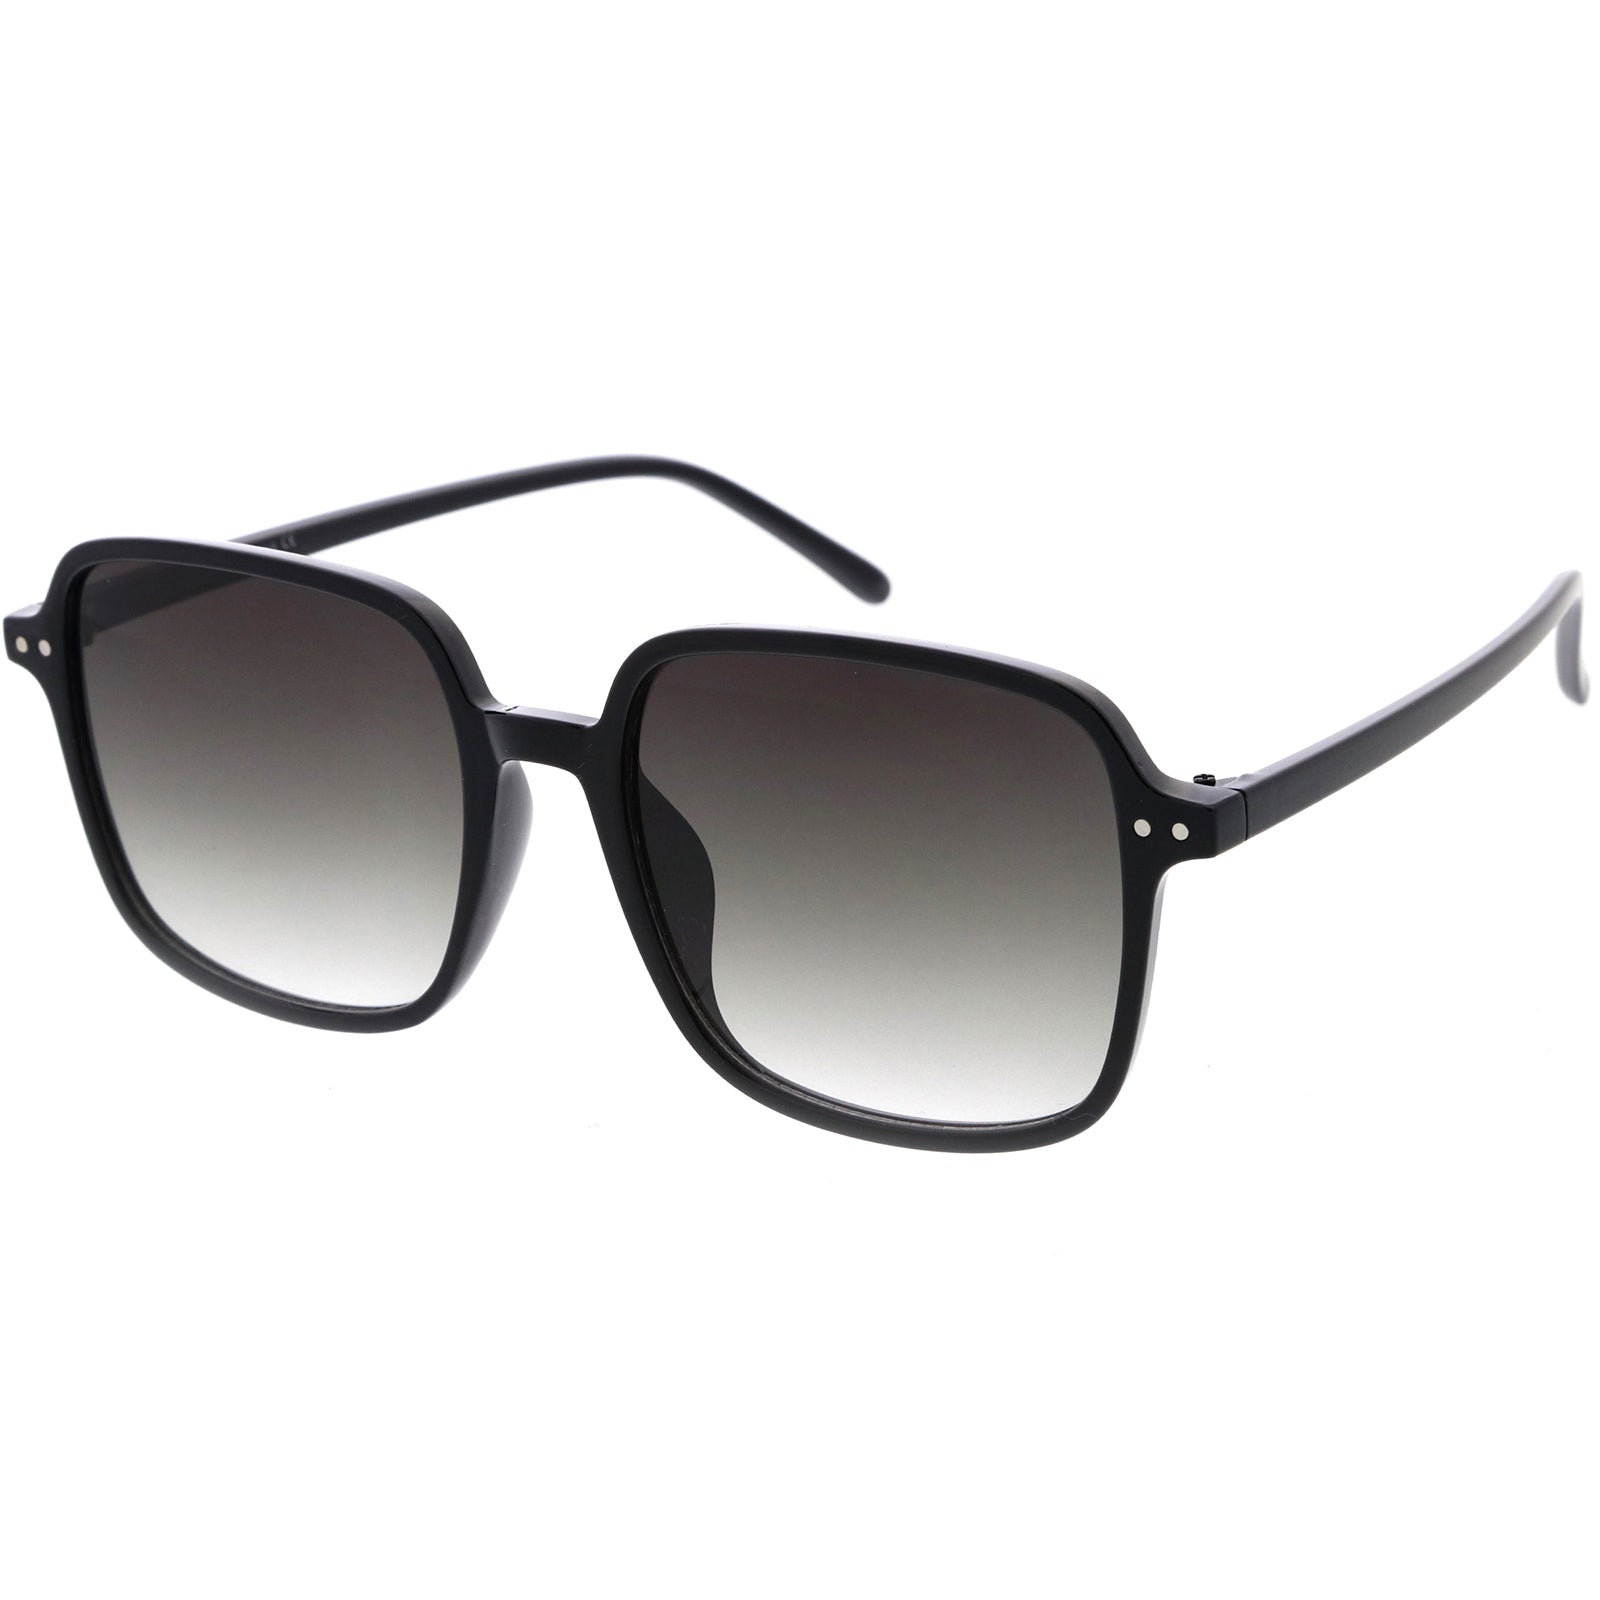 Everyday Chic Mid Temple Square Oversized Sunglasses 57mm